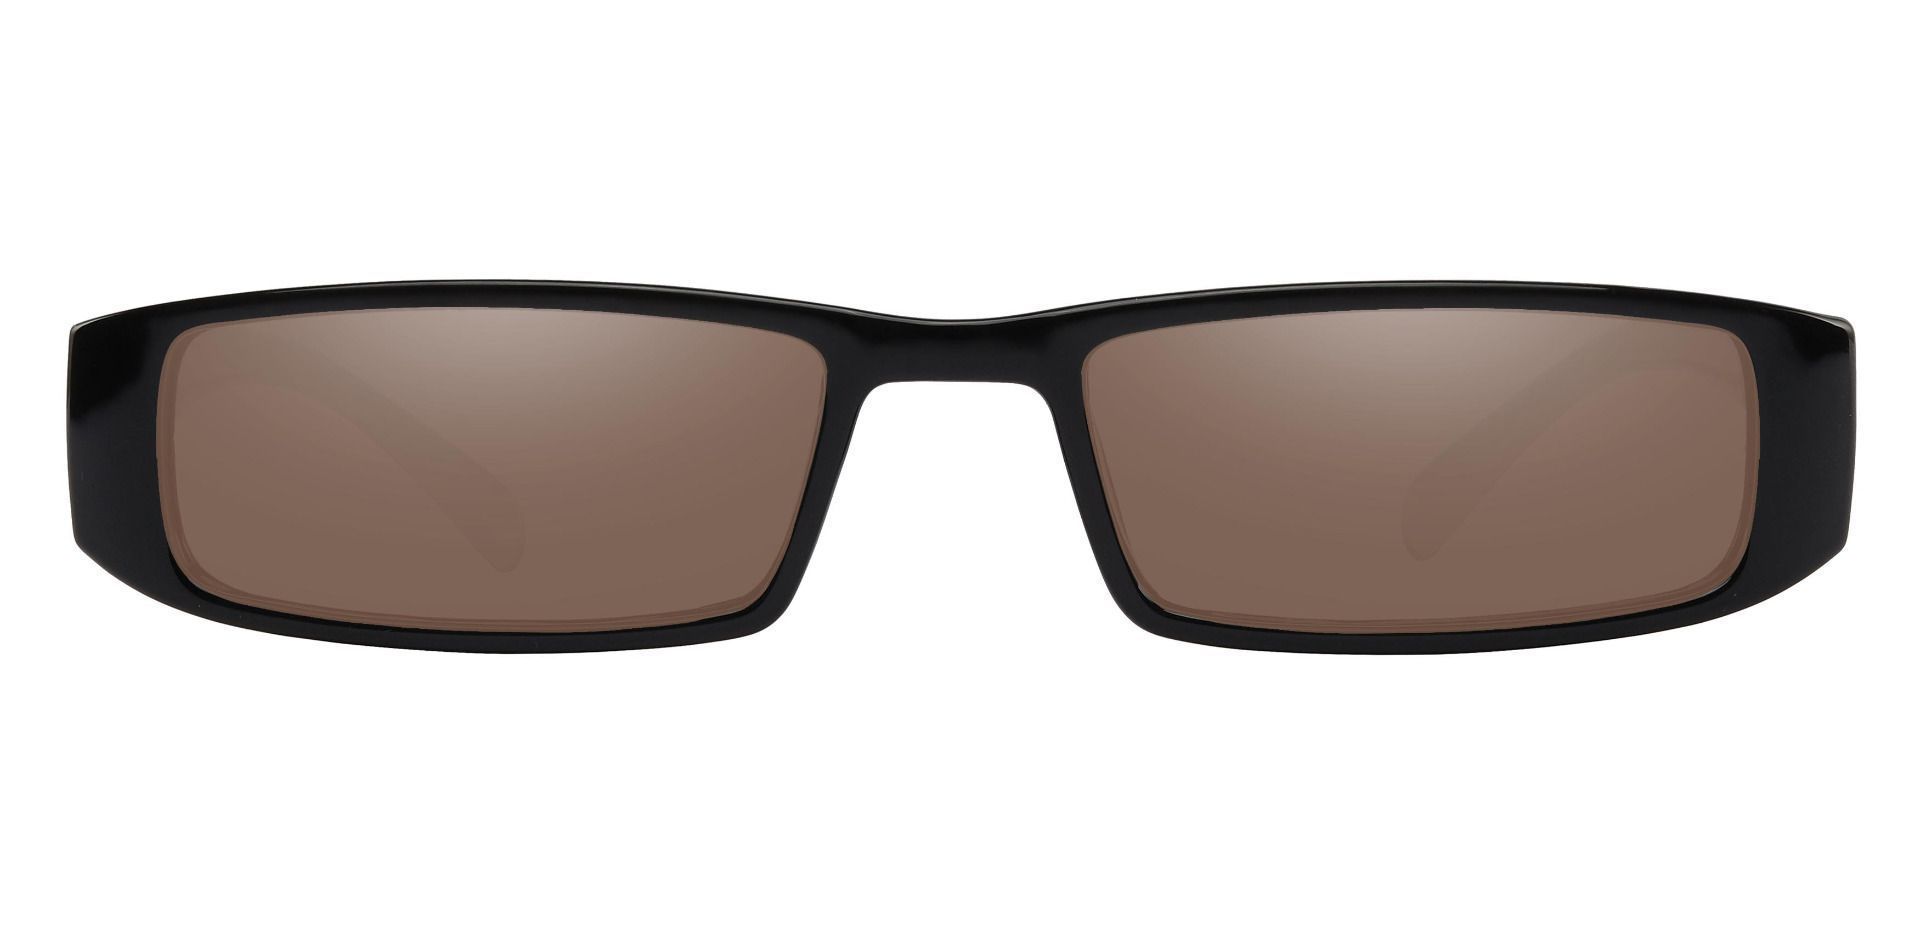 Buccaneer Rectangle Reading Sunglasses - Black Frame With Brown Lenses